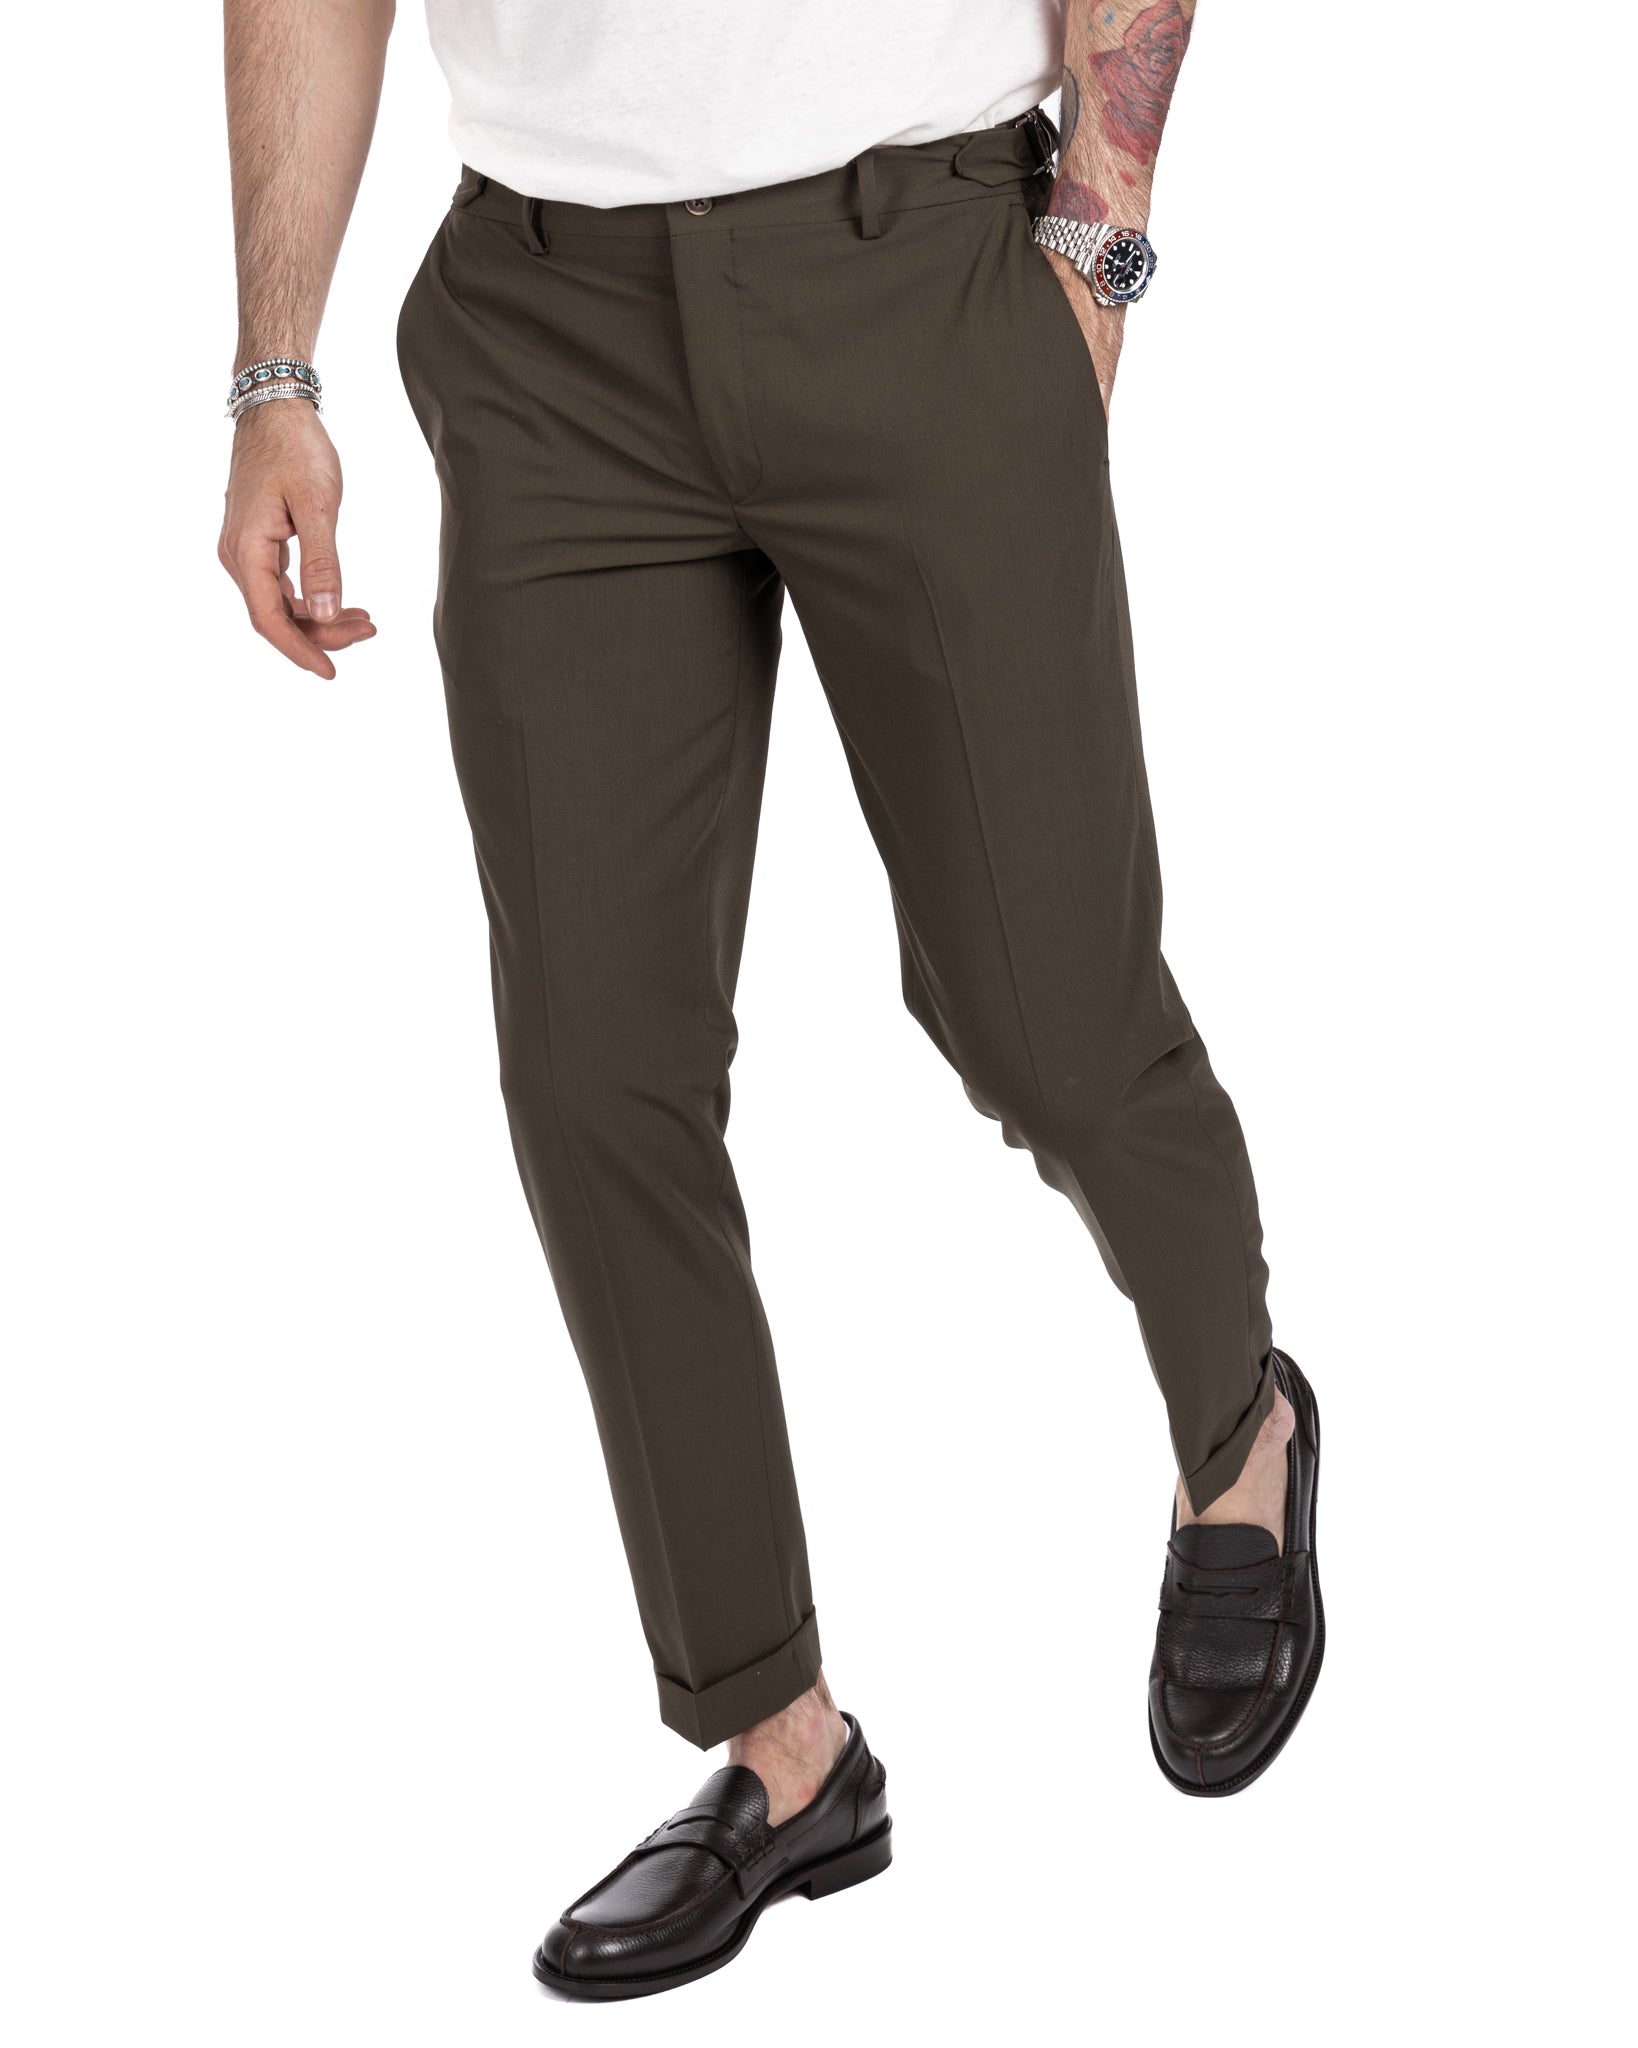 Trani - trousers with military buckles